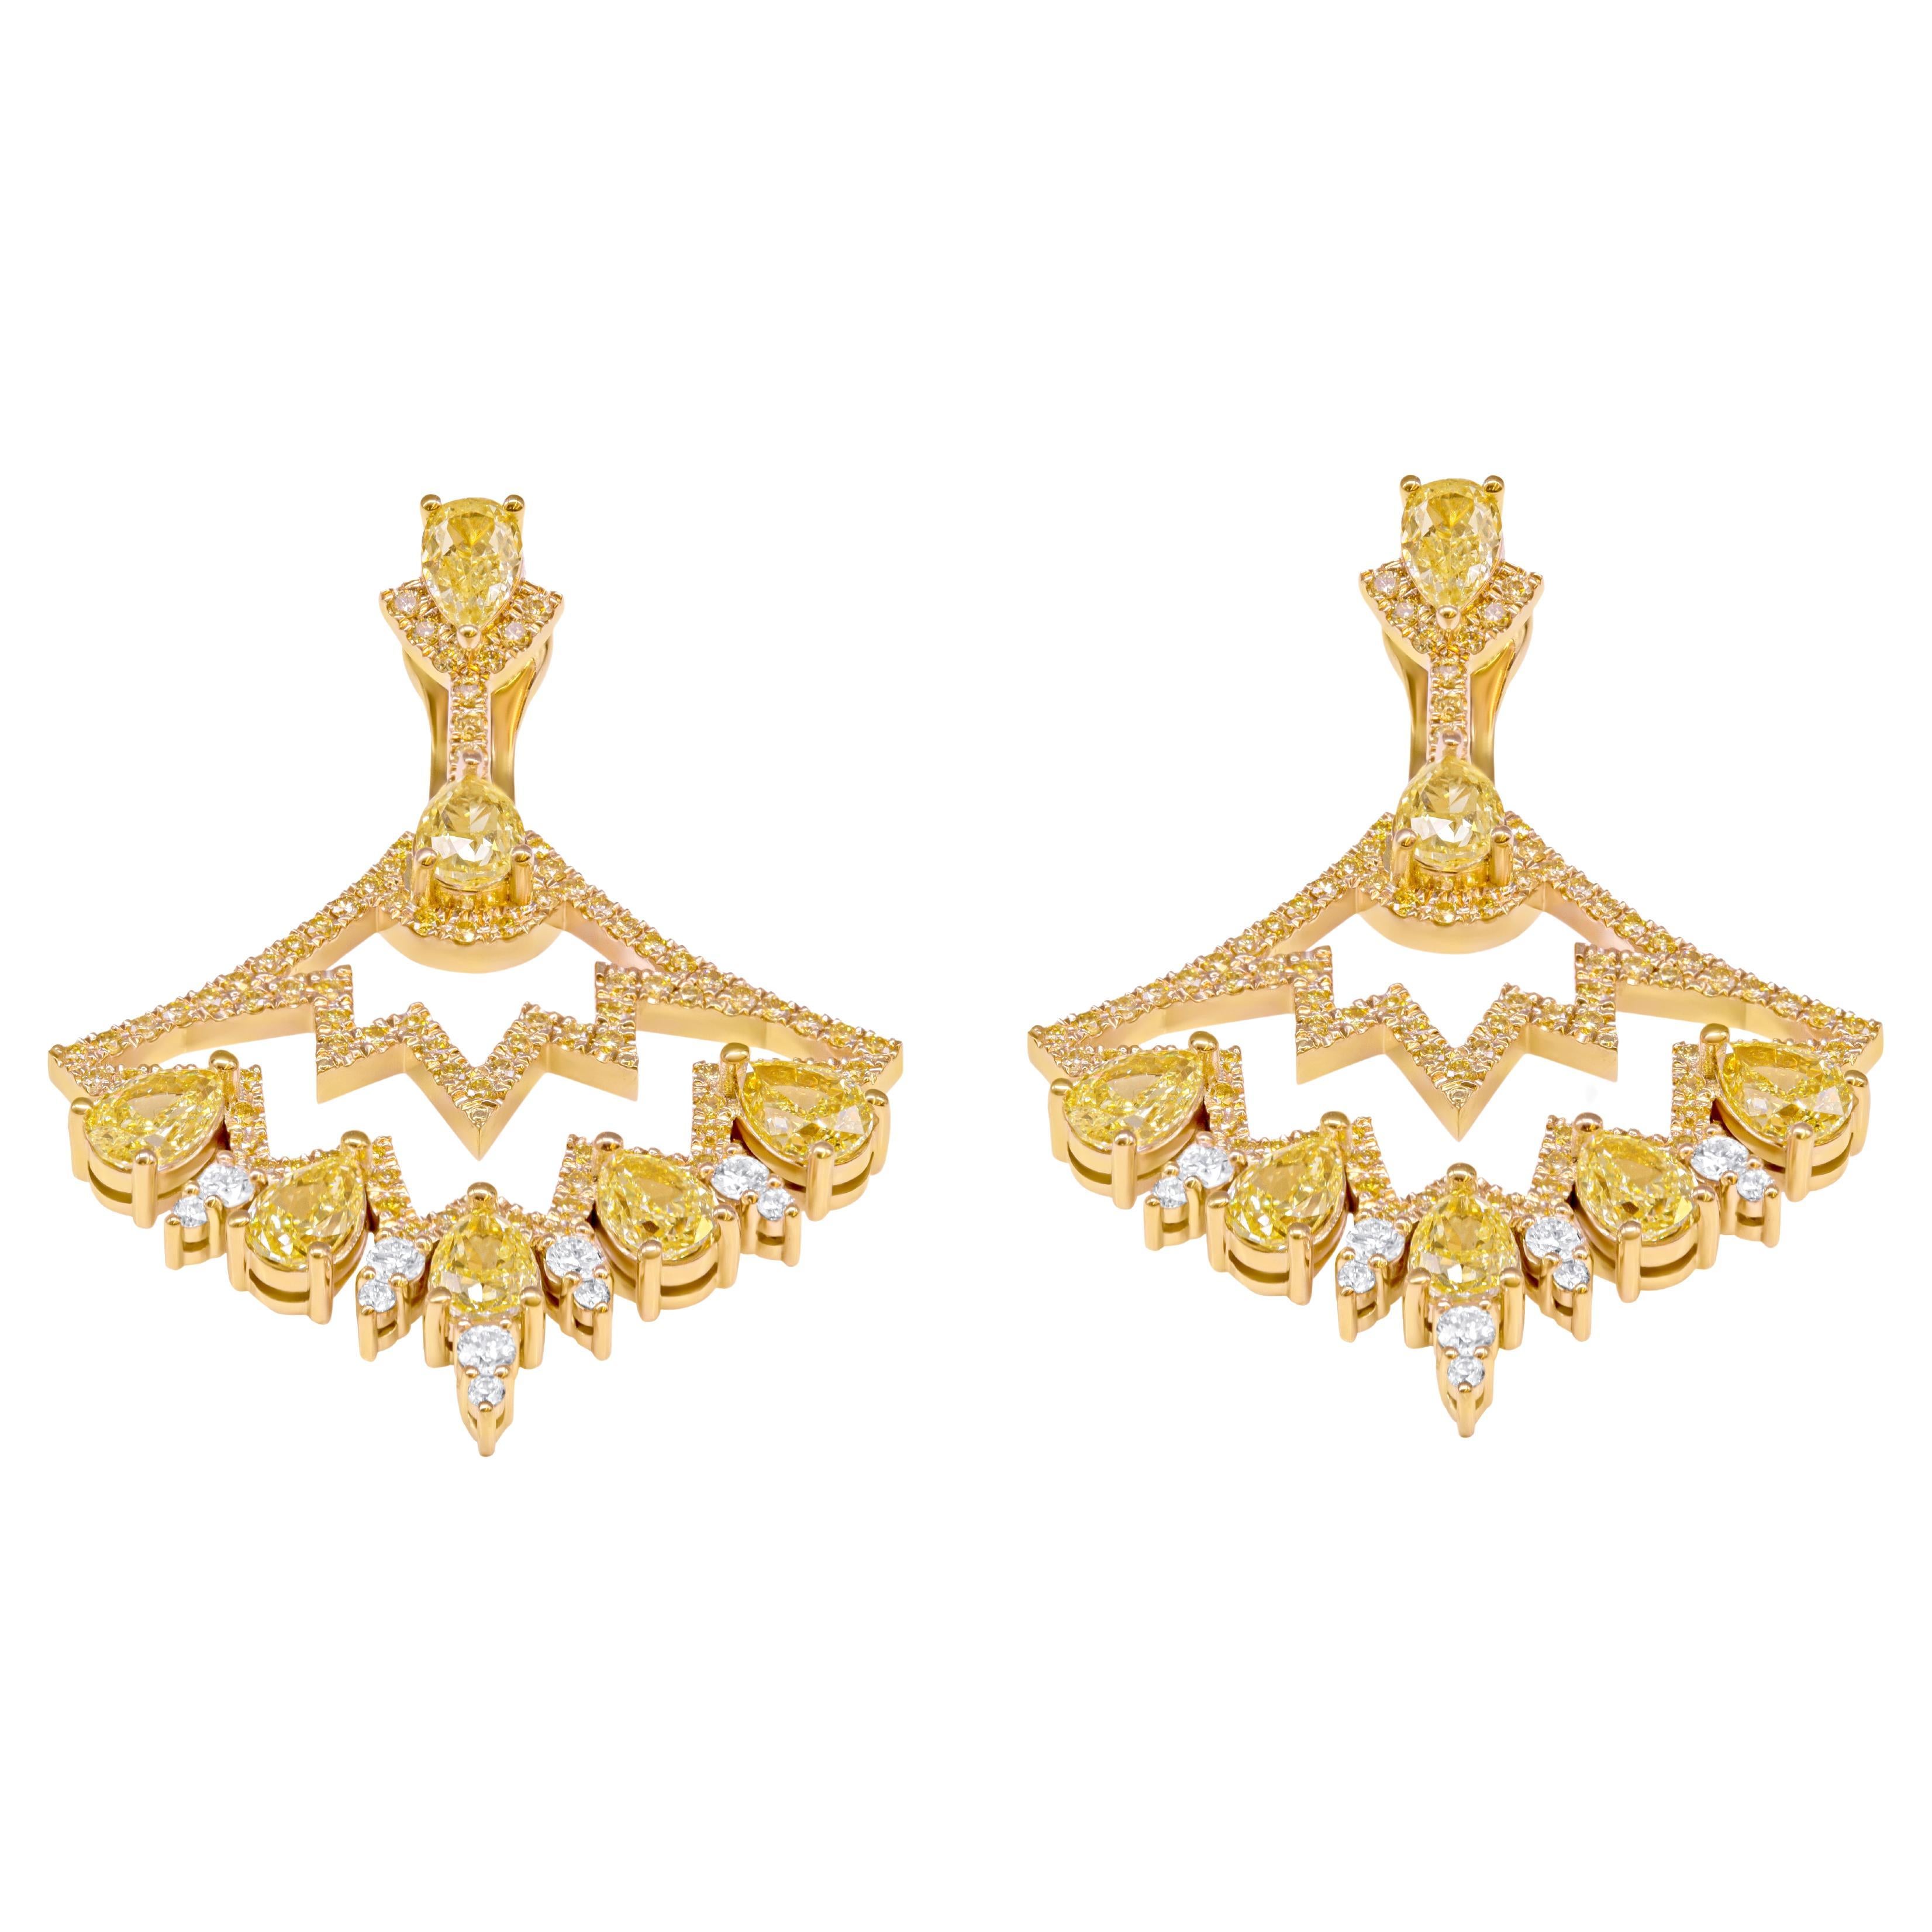 Introducing our exquisite collection of Chandelier Earrings crafted with precision in 18K Yellow Gold and 18K White Gold. These stunning earrings feature a total of 14 pear-shaped fancy yellow diamonds, each weighing 0.30 carats, culminating in a